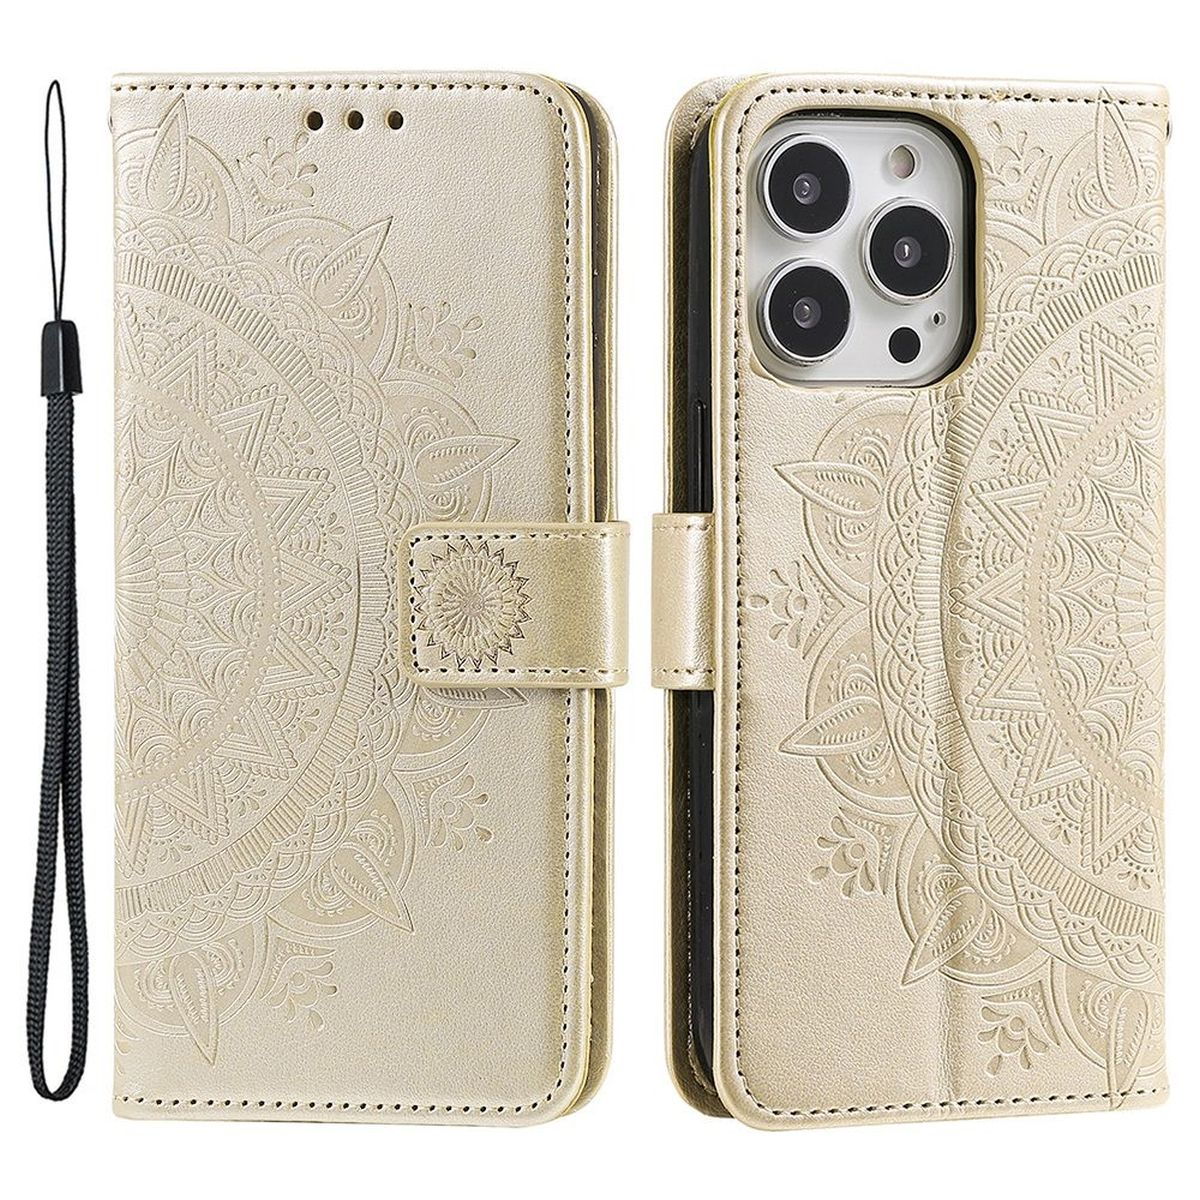 COVERKINGZ 14 Apple, iPhone mit Klapphülle Pro, Mandala Muster, Gold Bookcover,